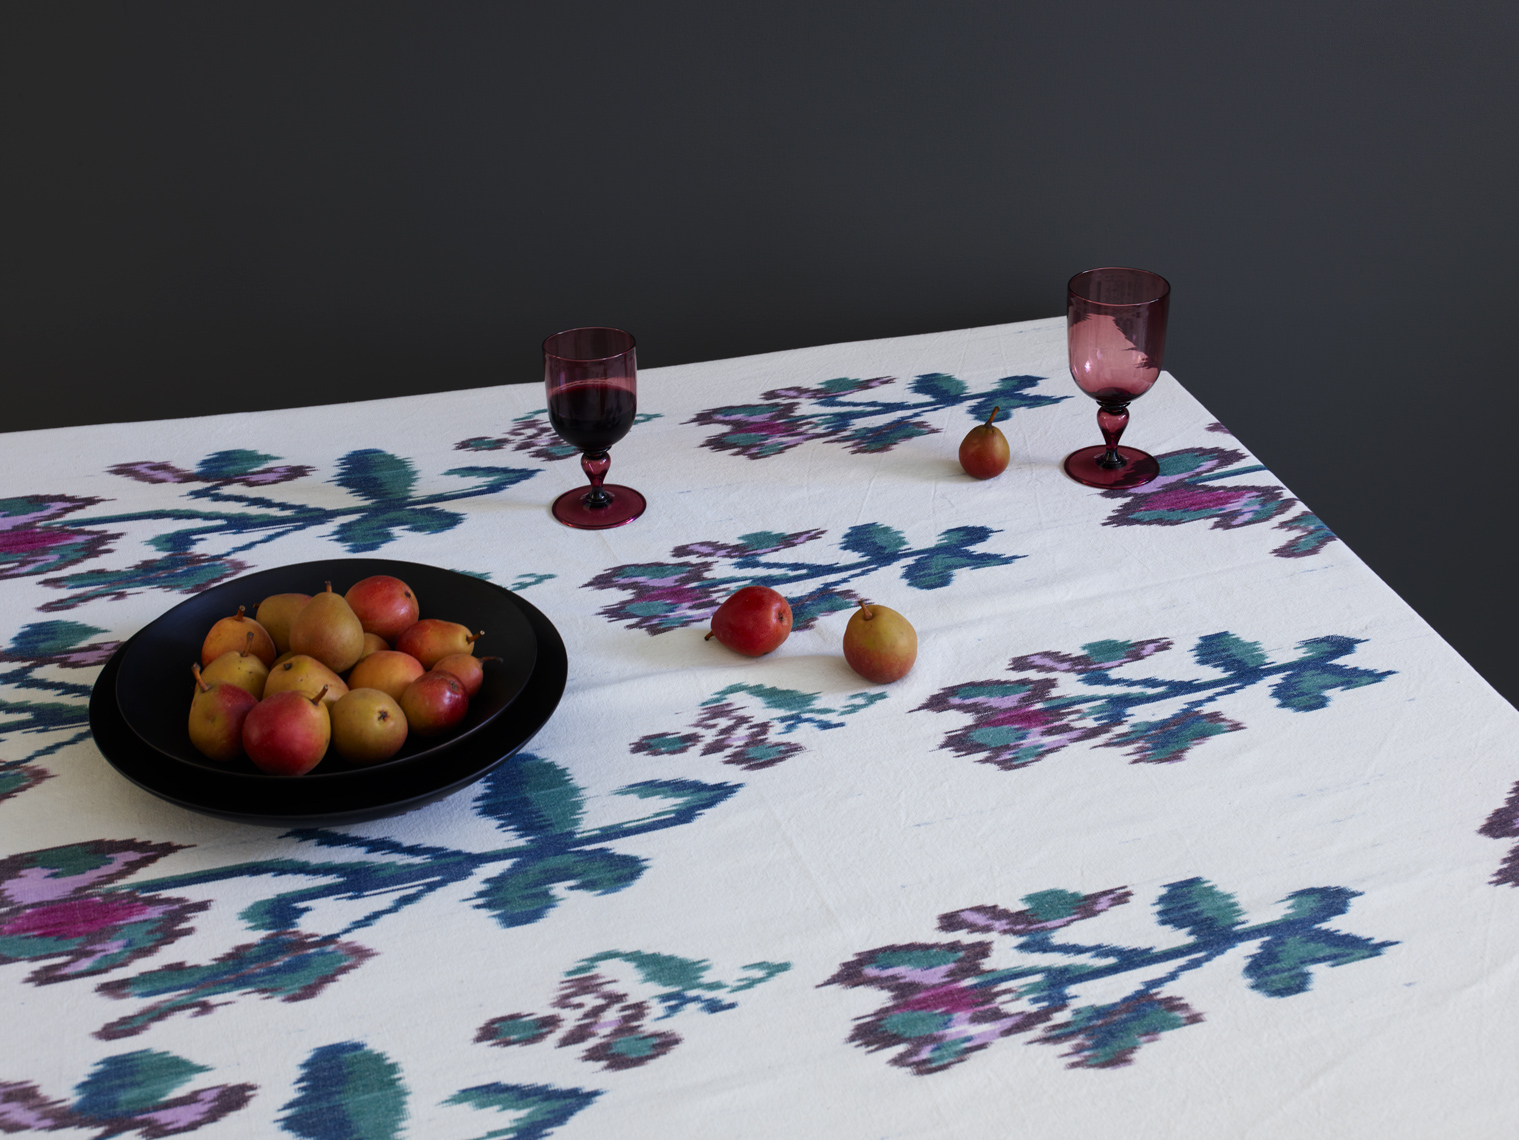 20.David-Fuin-Amethyst-Glass-and-Gregory-Parkinson-tablecloth_1005-HERO